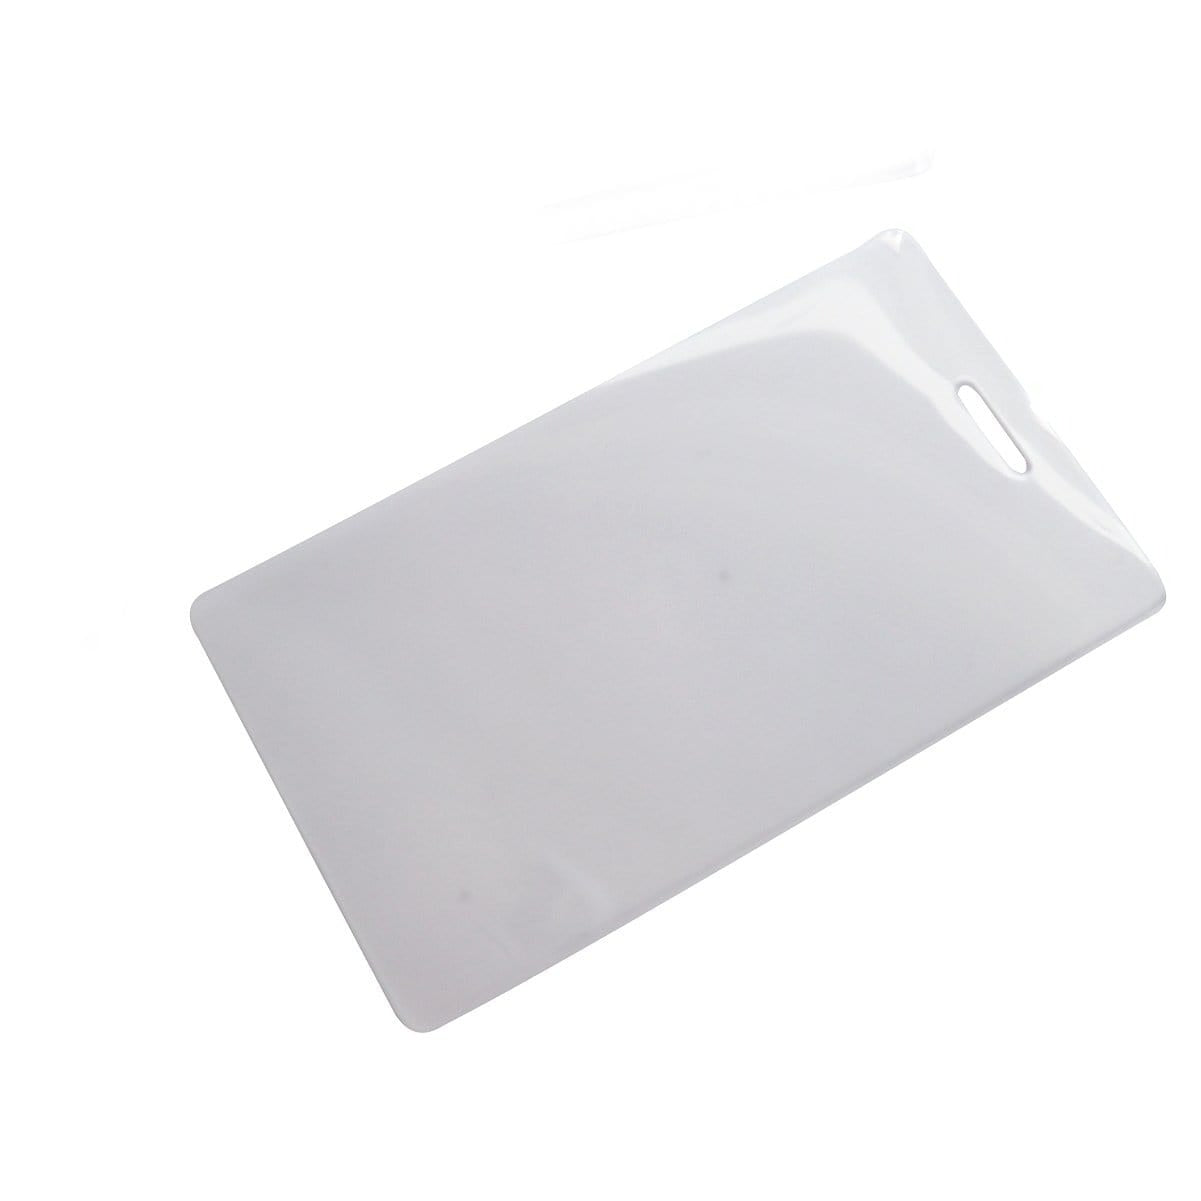 10 Mil Heavy Duty Laminating Pouch for  2.5" x 4.25"  Luggage Tags or ID with Vertical Slot Hole